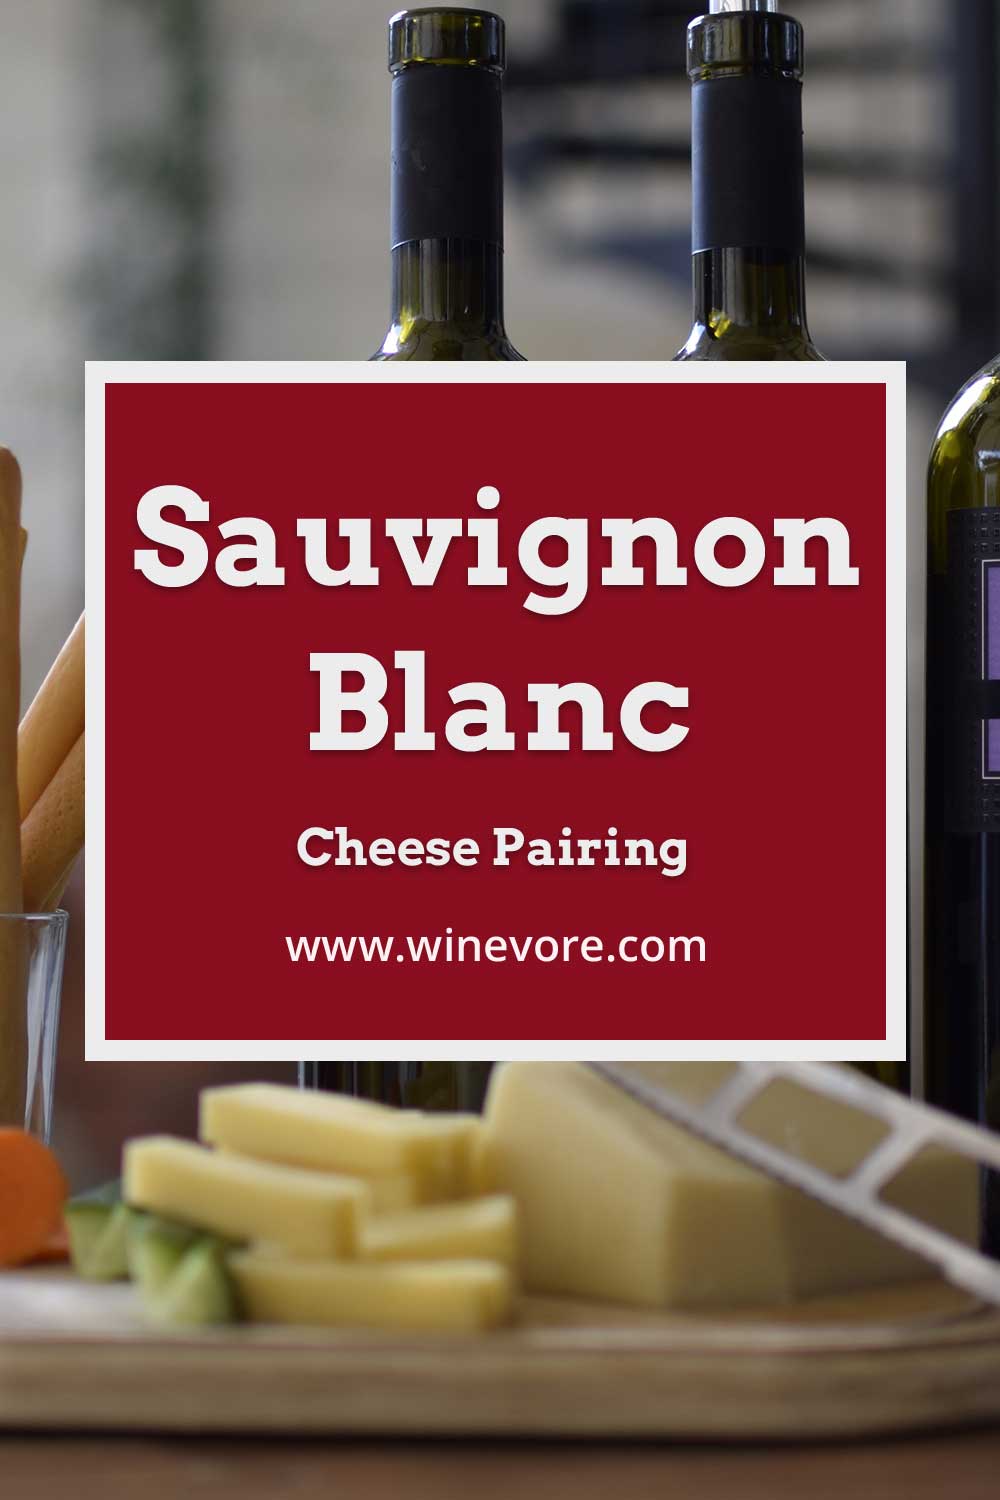 Slice cheese in front of wine bottle - Sauvignon Blanc Cheese Pairing.